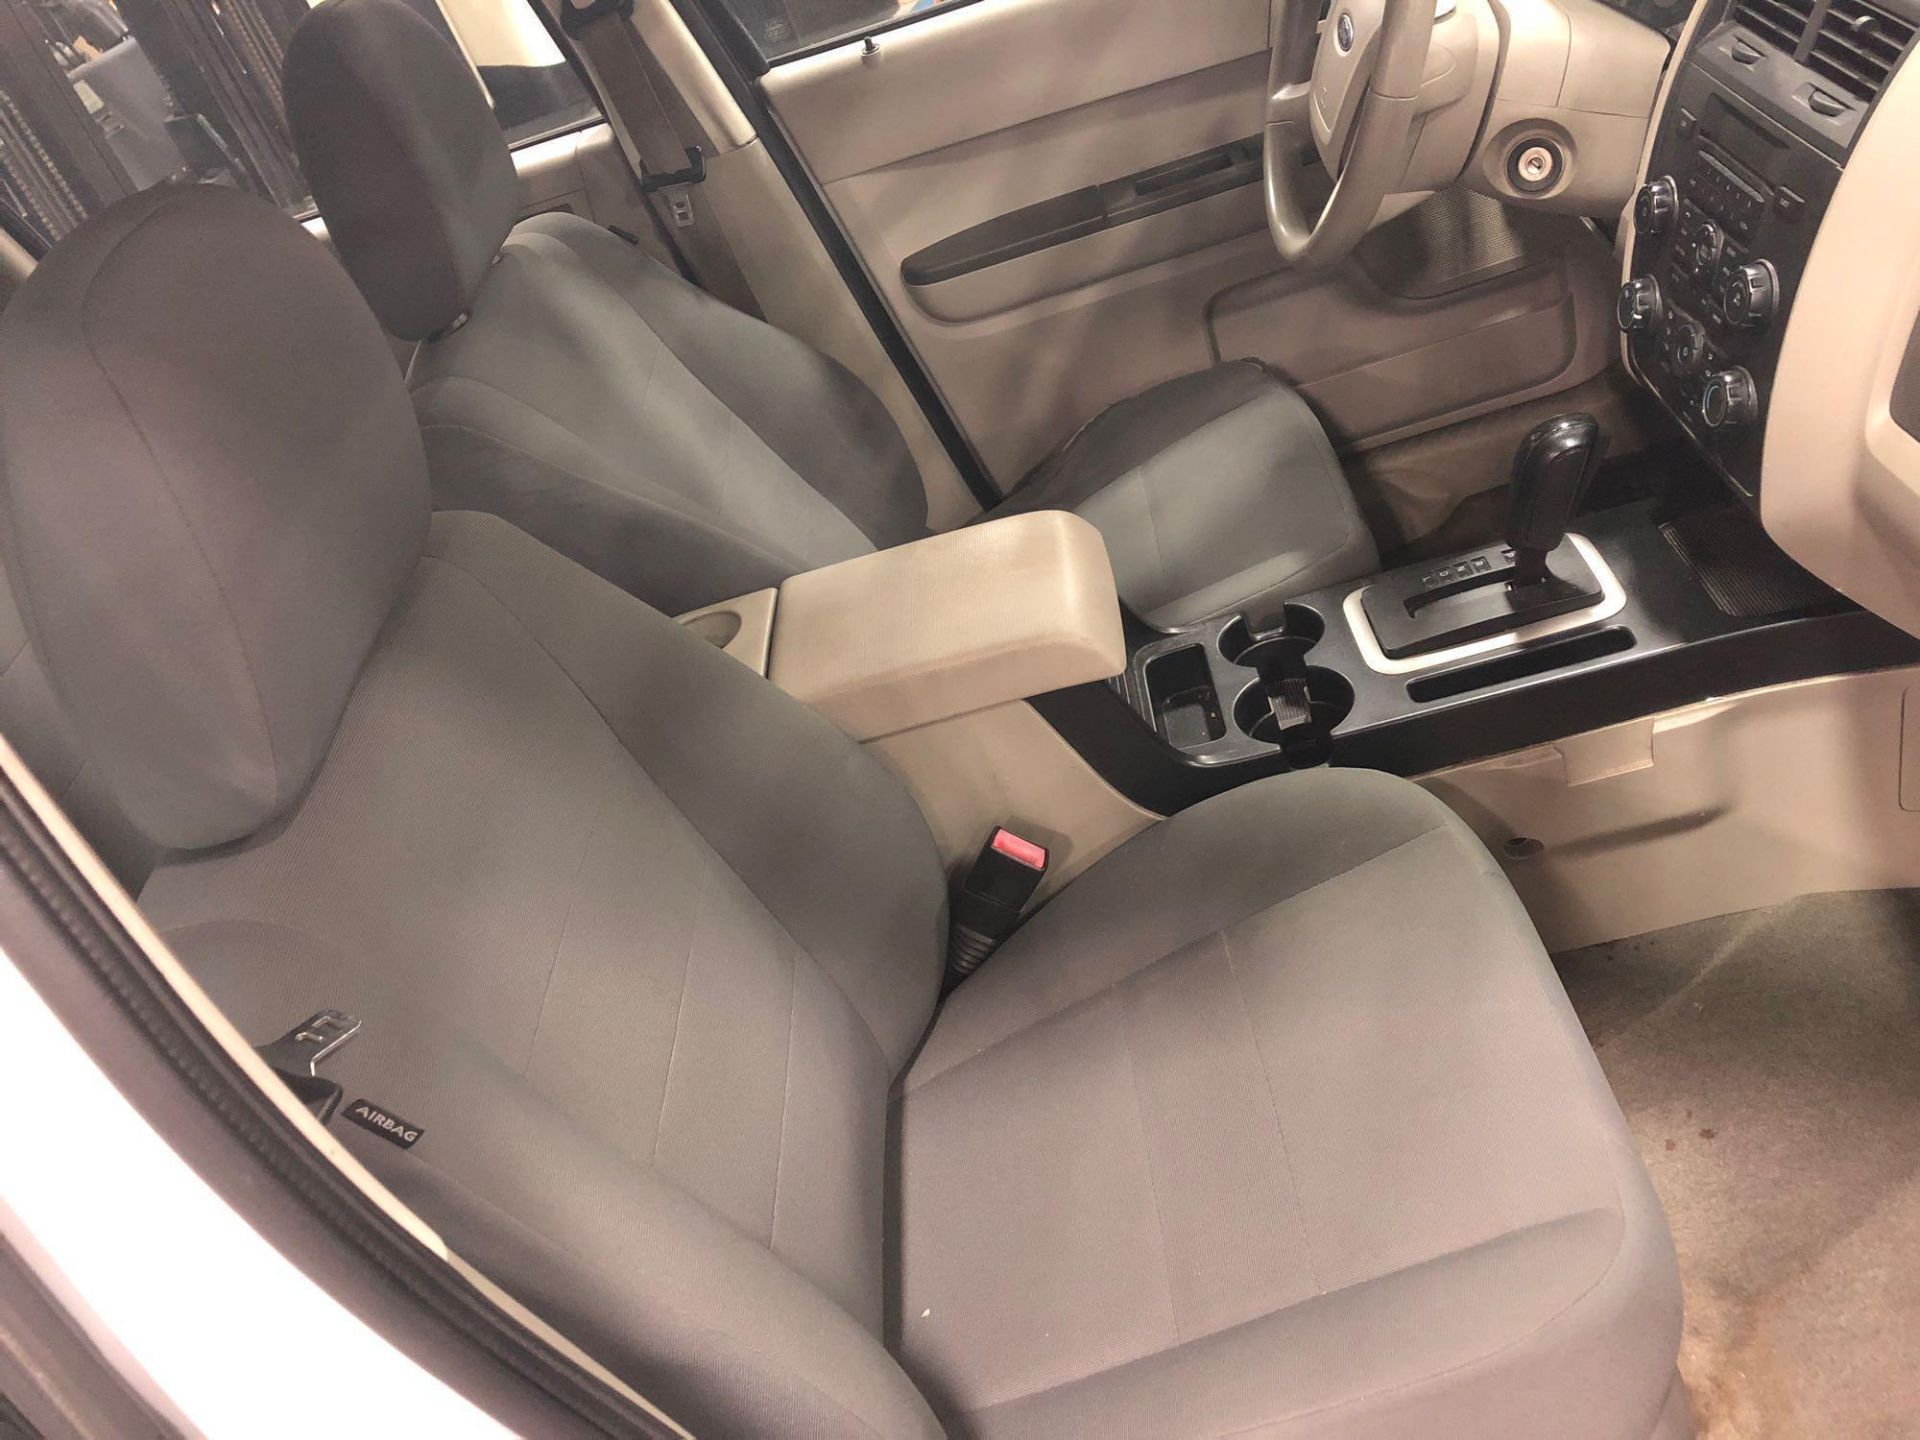 2010 FORD ESCAPE SUV, 4 DOOR, AUTOMATIC TRANSMISSION, RUNS - Image 9 of 17